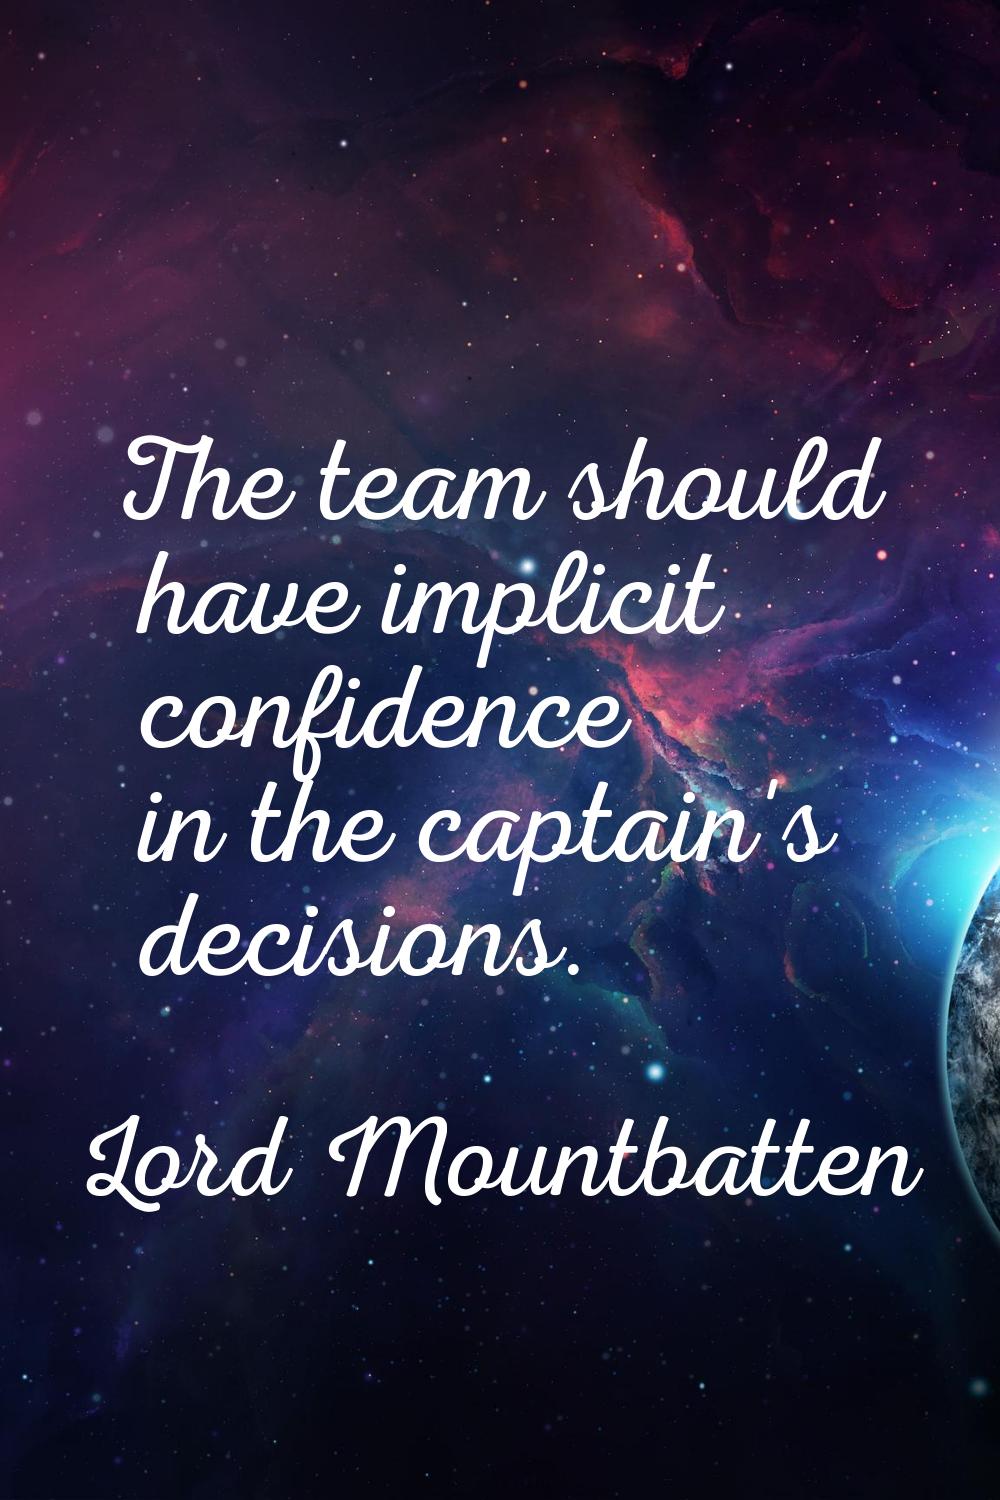 The team should have implicit confidence in the captain's decisions.